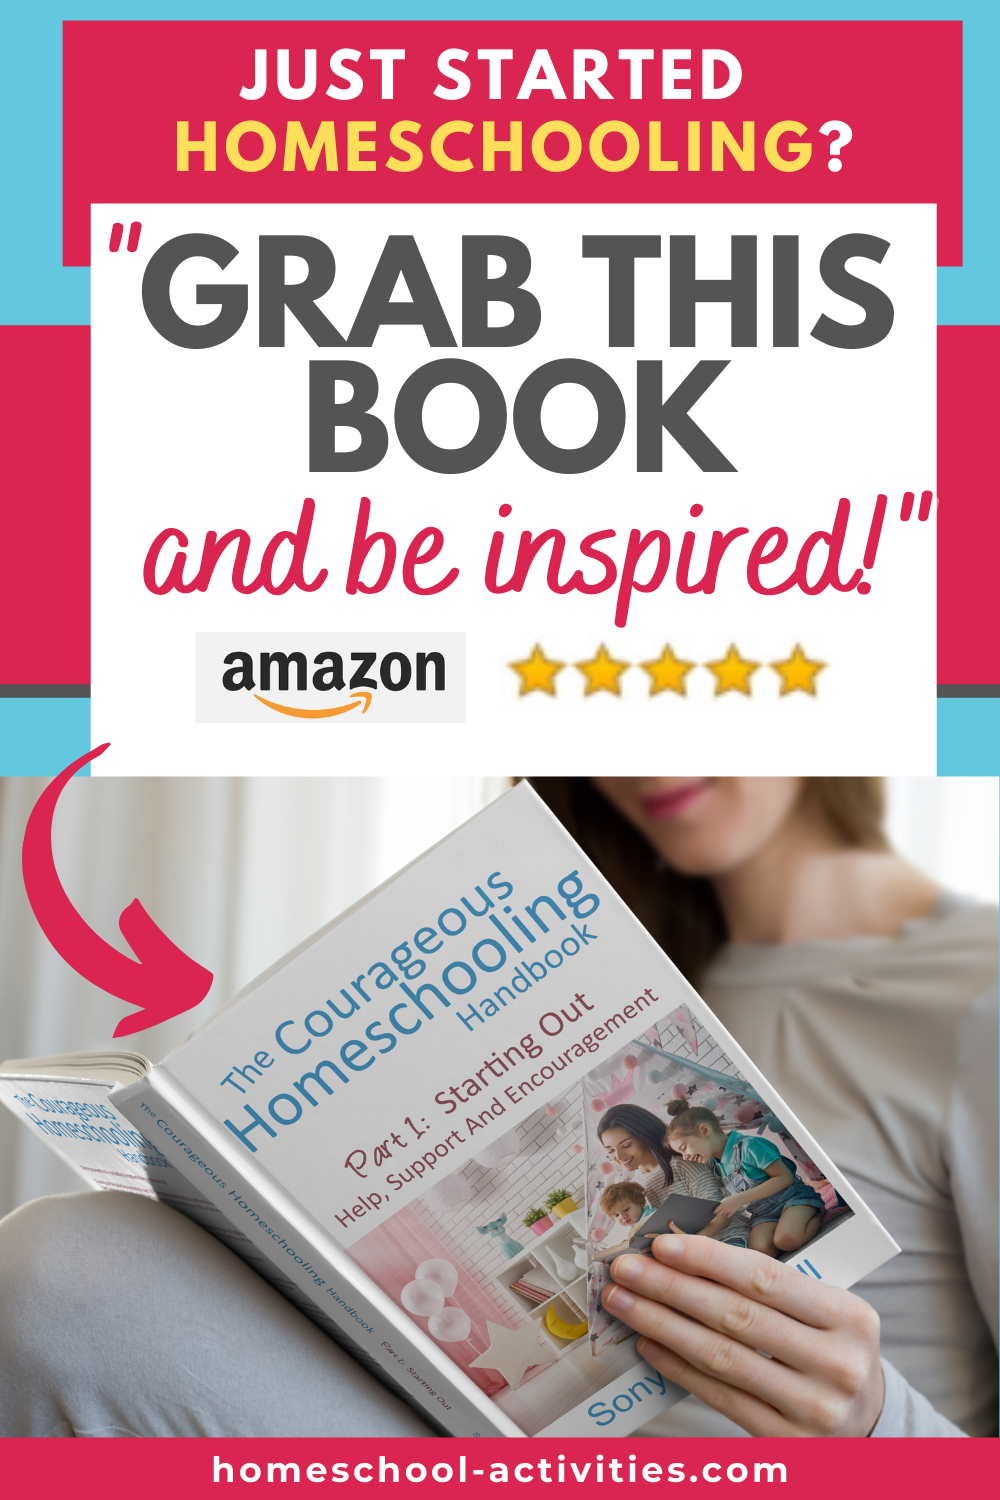 Highly recommended Courageous Homeschooling Handbook with advice and reassurance from 2,000 homeschool families